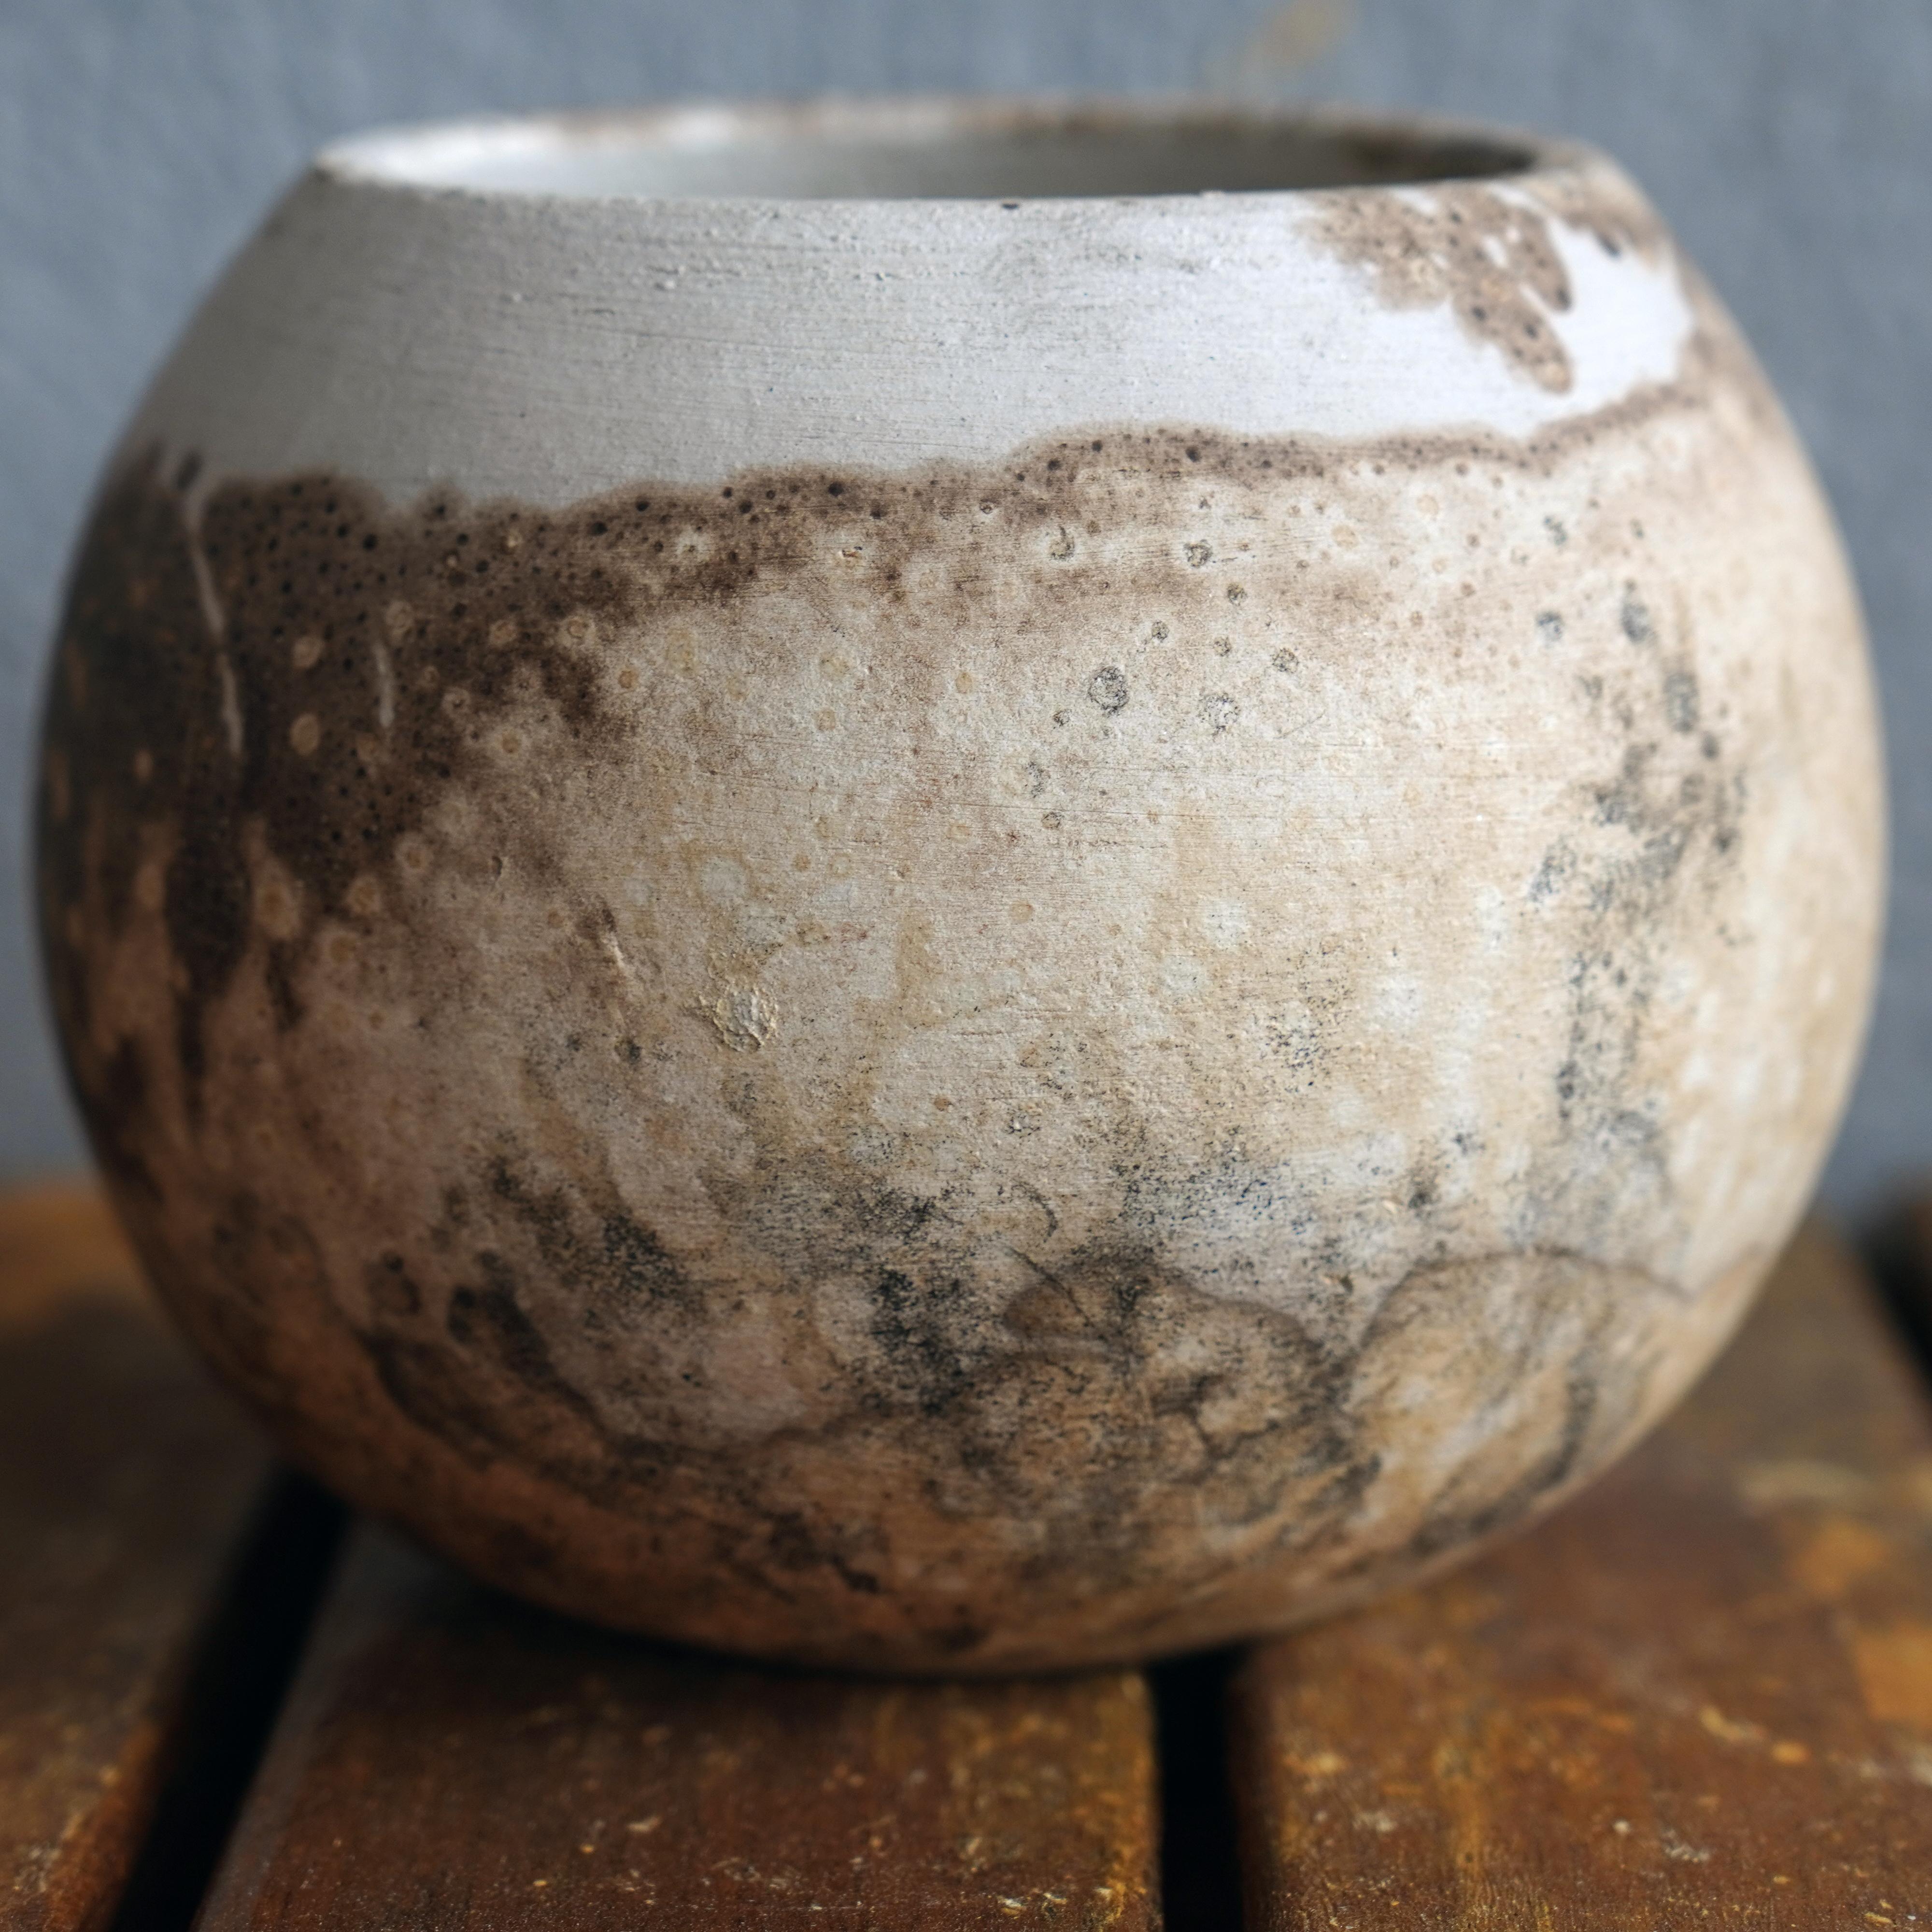 Zen (禅) 

Our Zen Vase is aptly named for its wide circular shape, exuding a sense of ease and peace. Its soothing curves evokes the shape of planet earth. Looking at this vase reminds us to be mindful of our actions in protecting and caring for